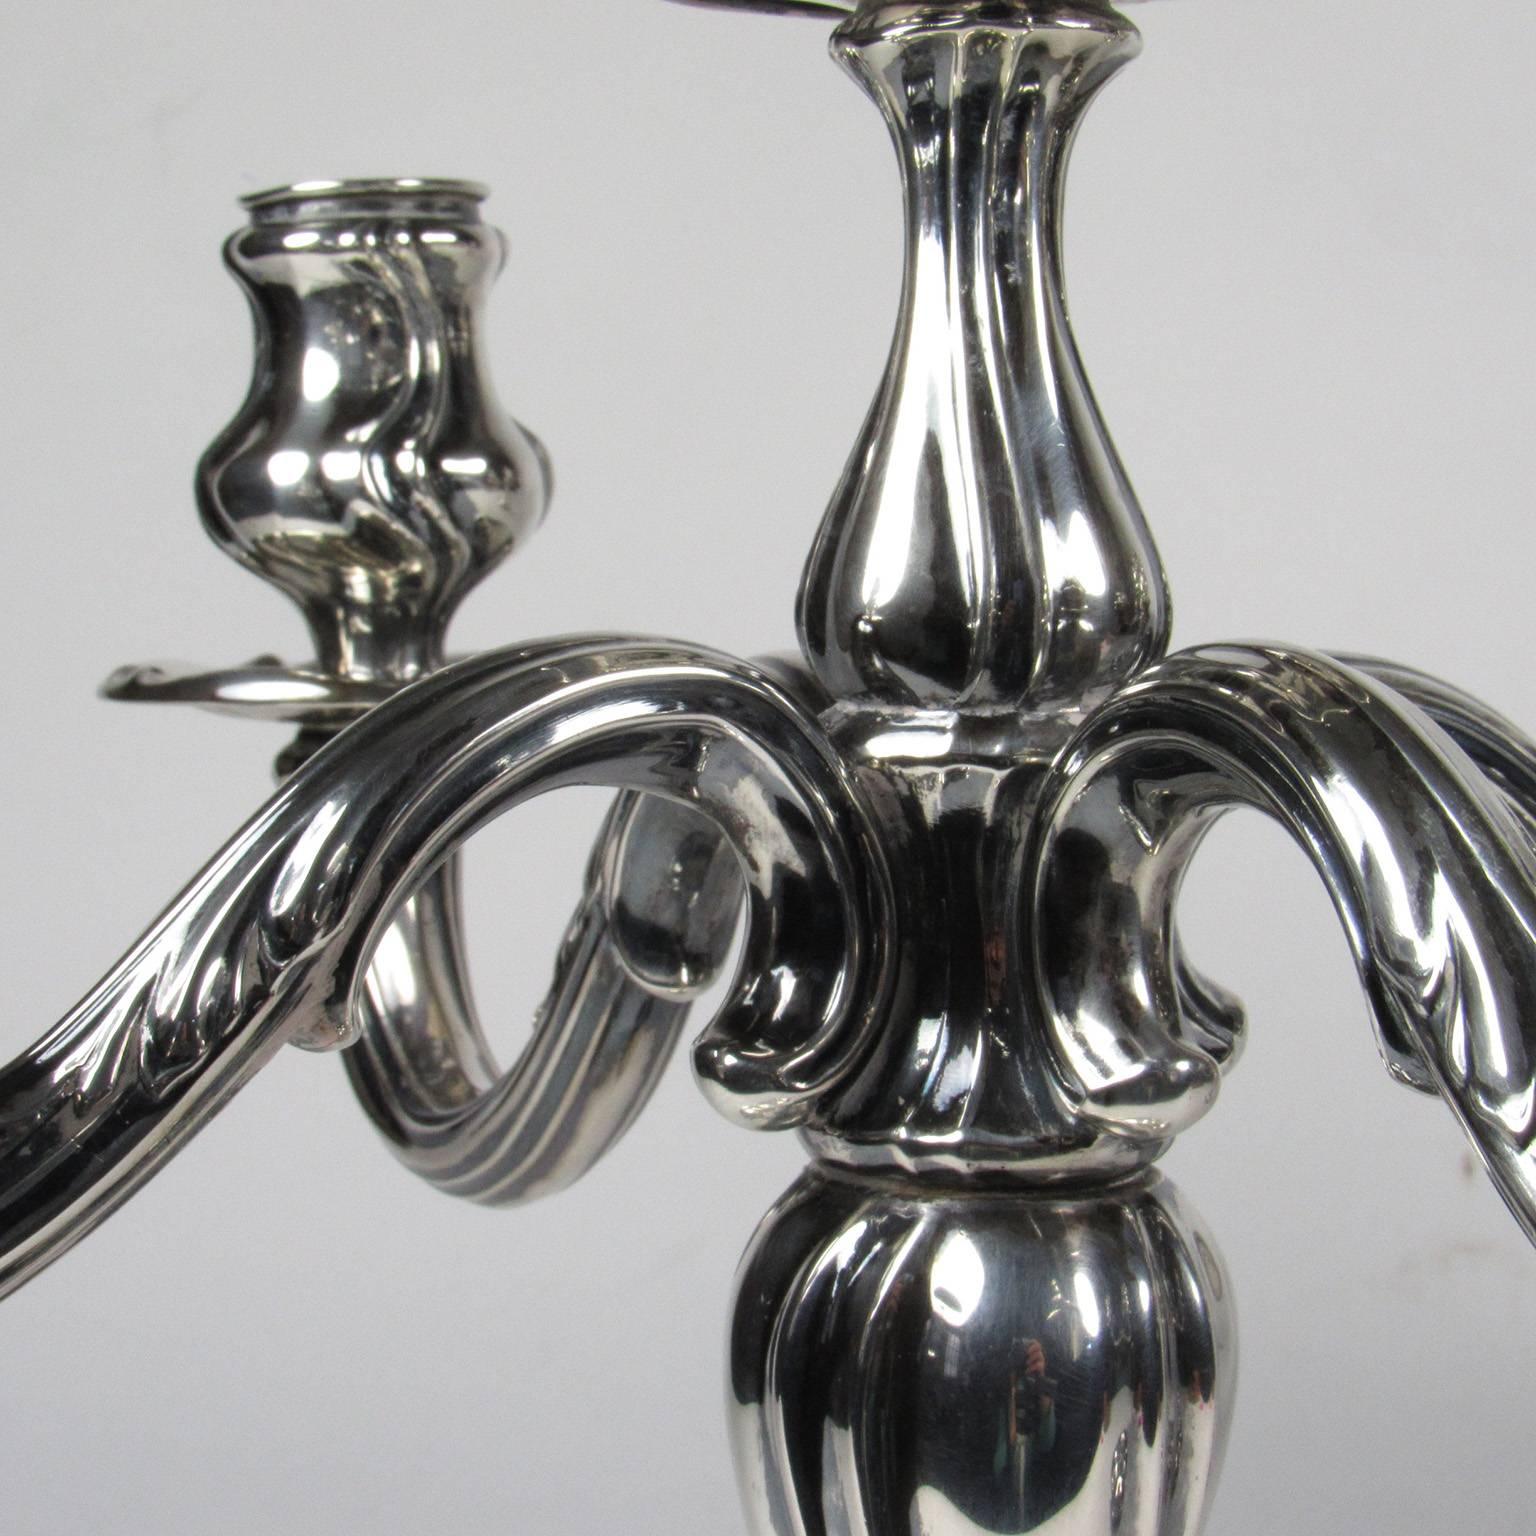 Pair of German 800 silver Art Nouveau five-light candelabra, bearing marks for Otto Wolter and Reichsmark for Germany, after 1886. Approximately 72 ozt. Measures: Height 14 in., diameter 15 in.